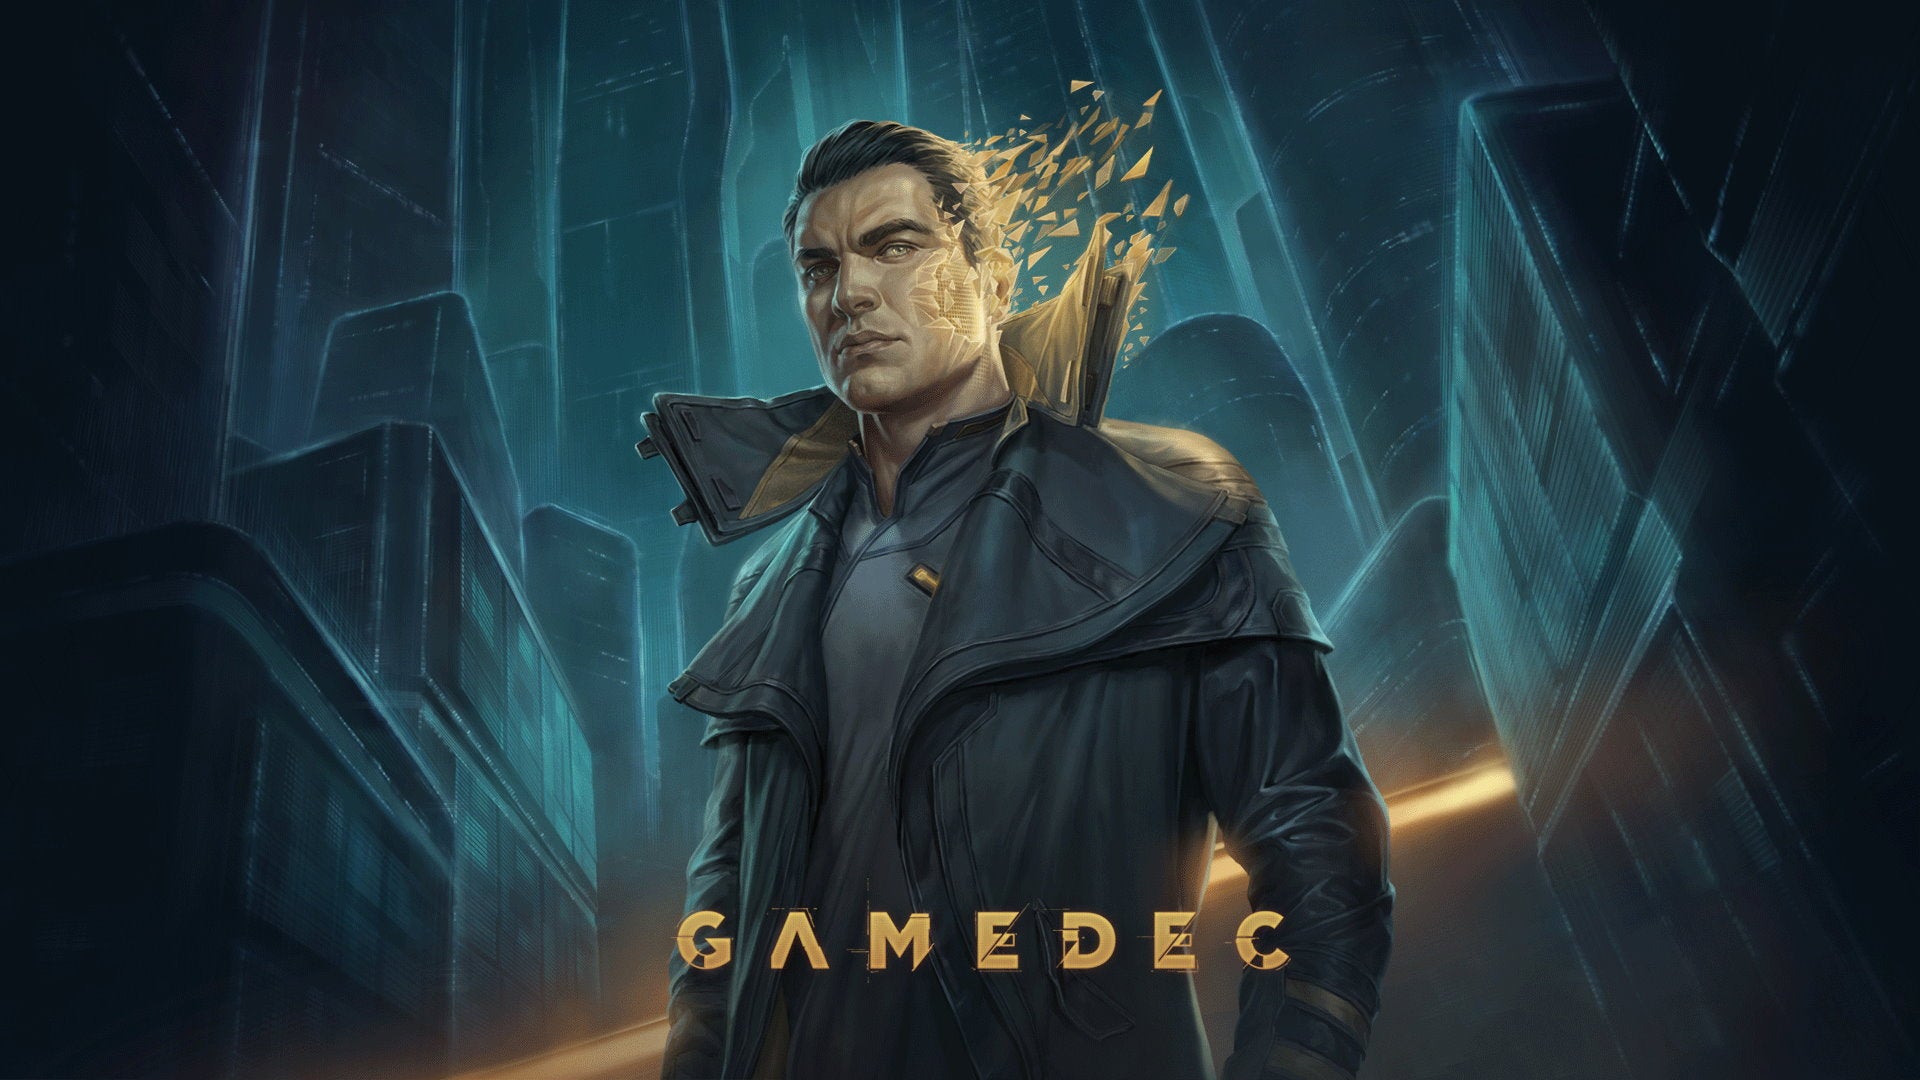 Artwork for the main character in Gamedec, also called Gamedec